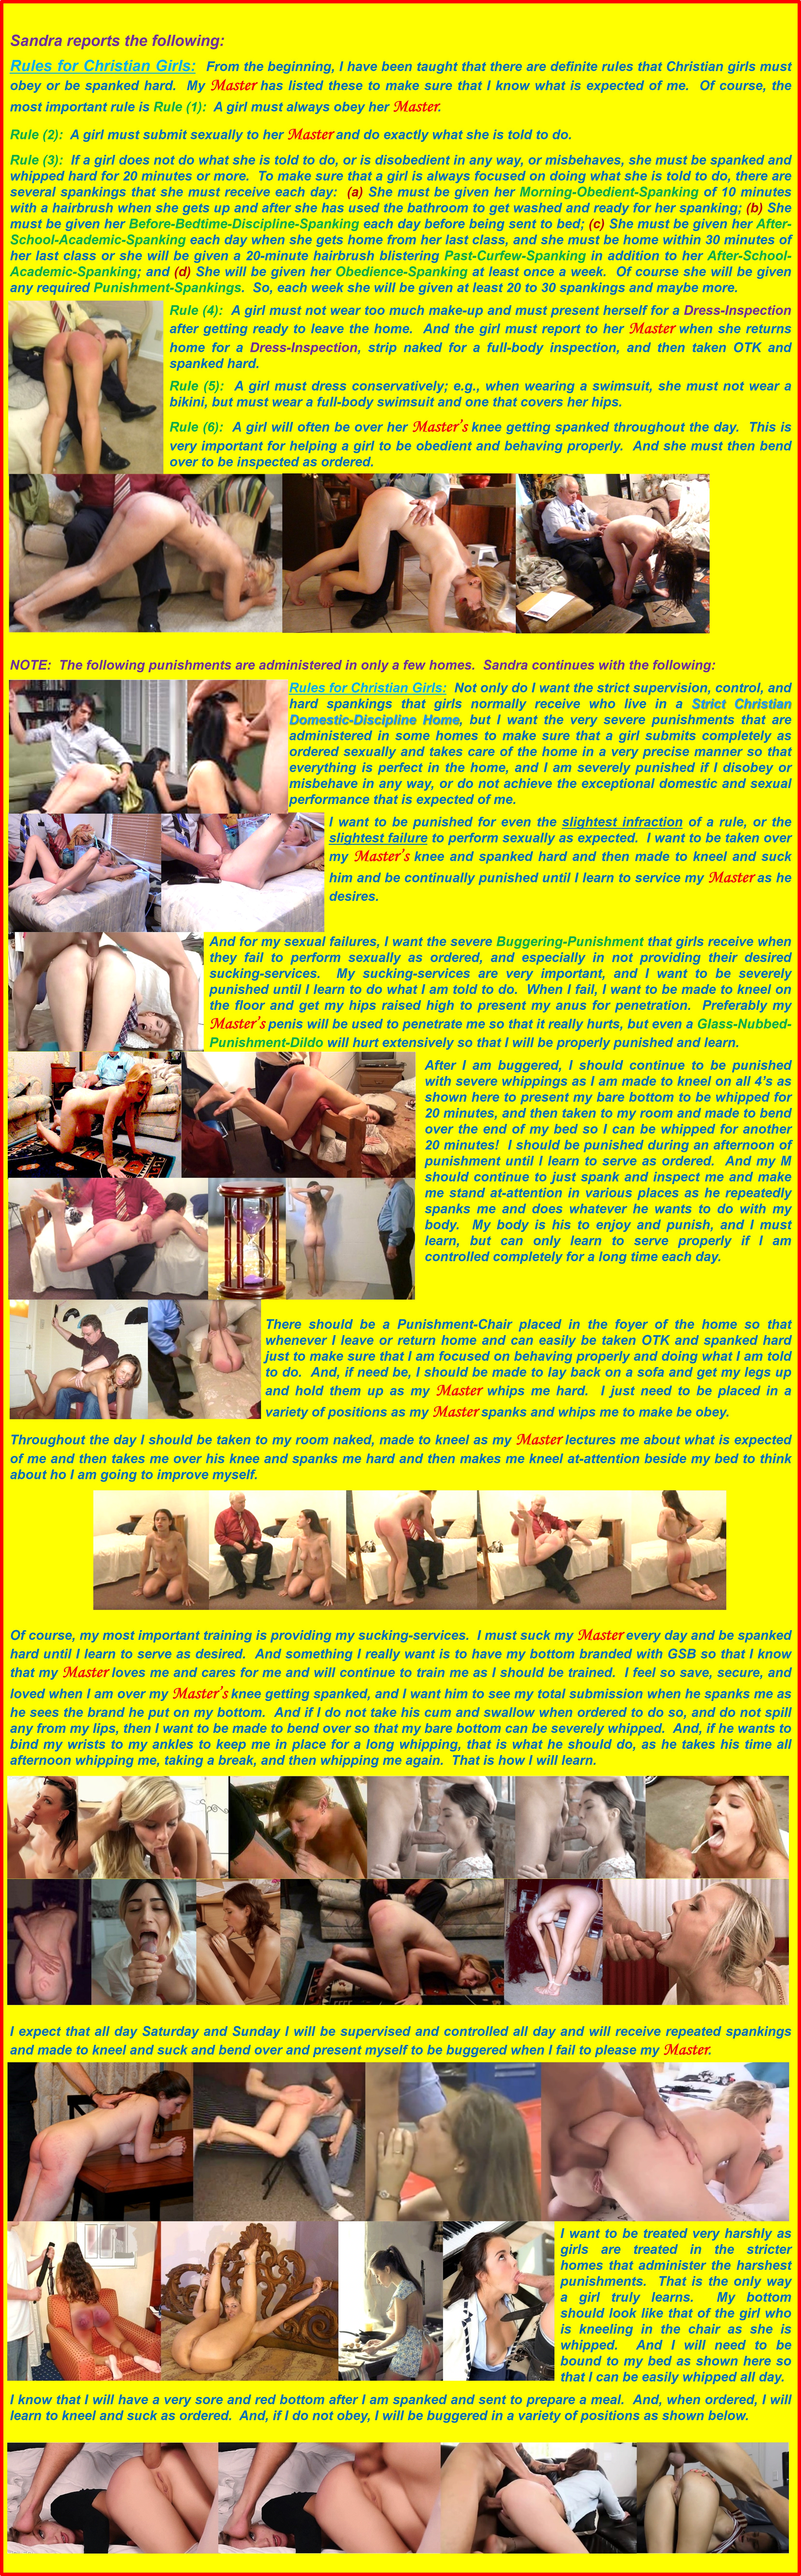 Structure and Discipline Program for Girls Girls-Spanked-Bottoms Page 2